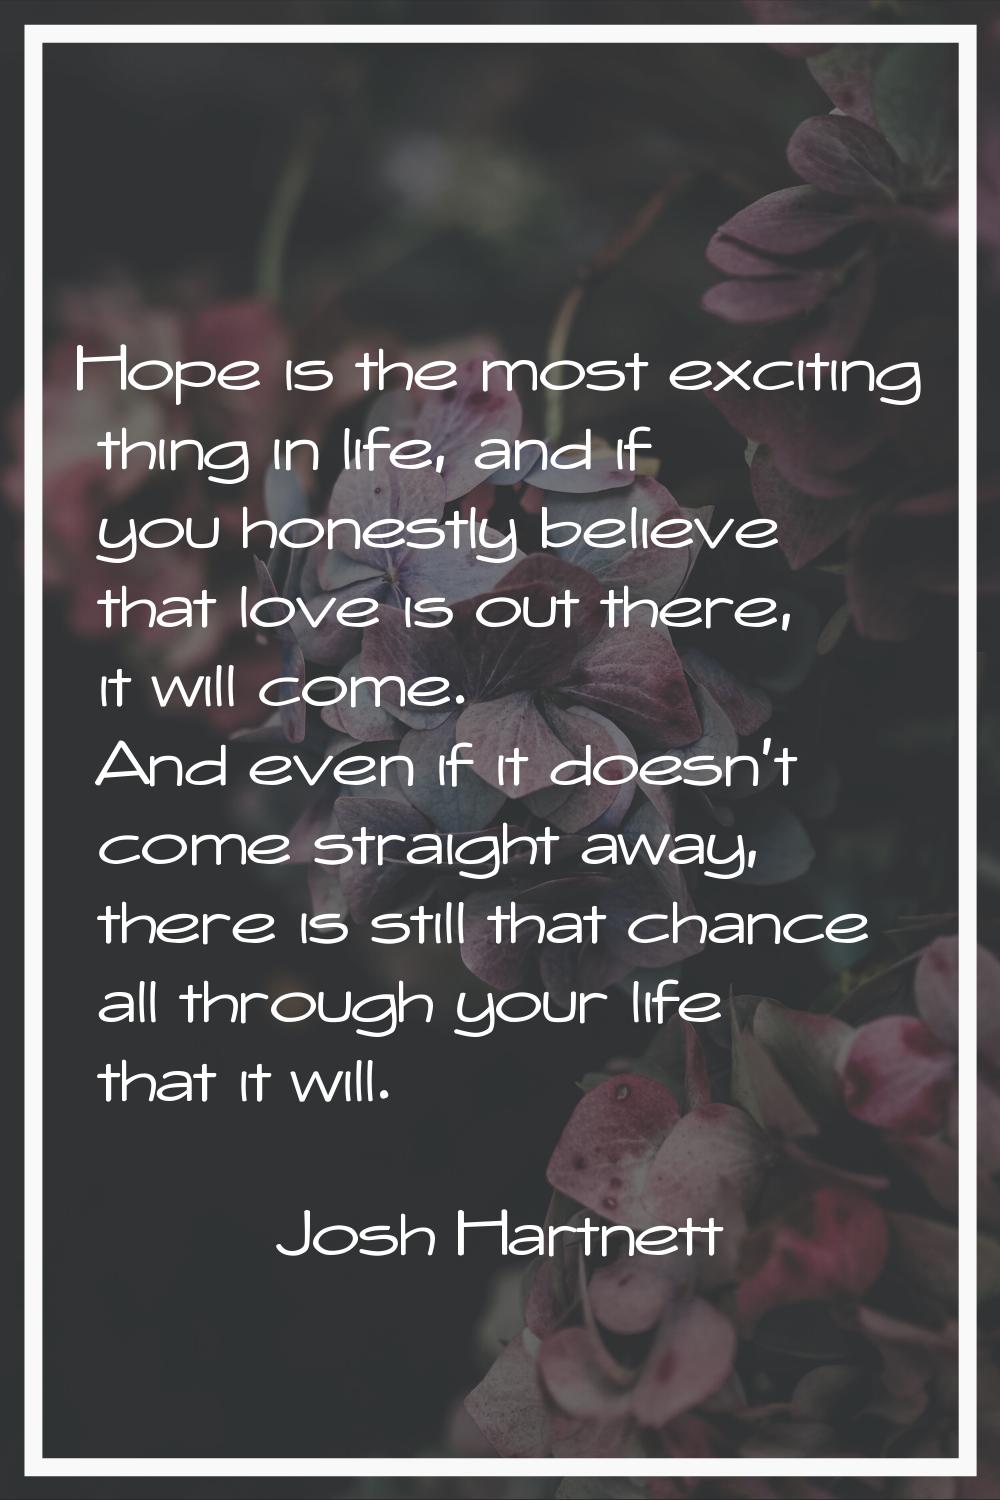 Hope is the most exciting thing in life, and if you honestly believe that love is out there, it wil